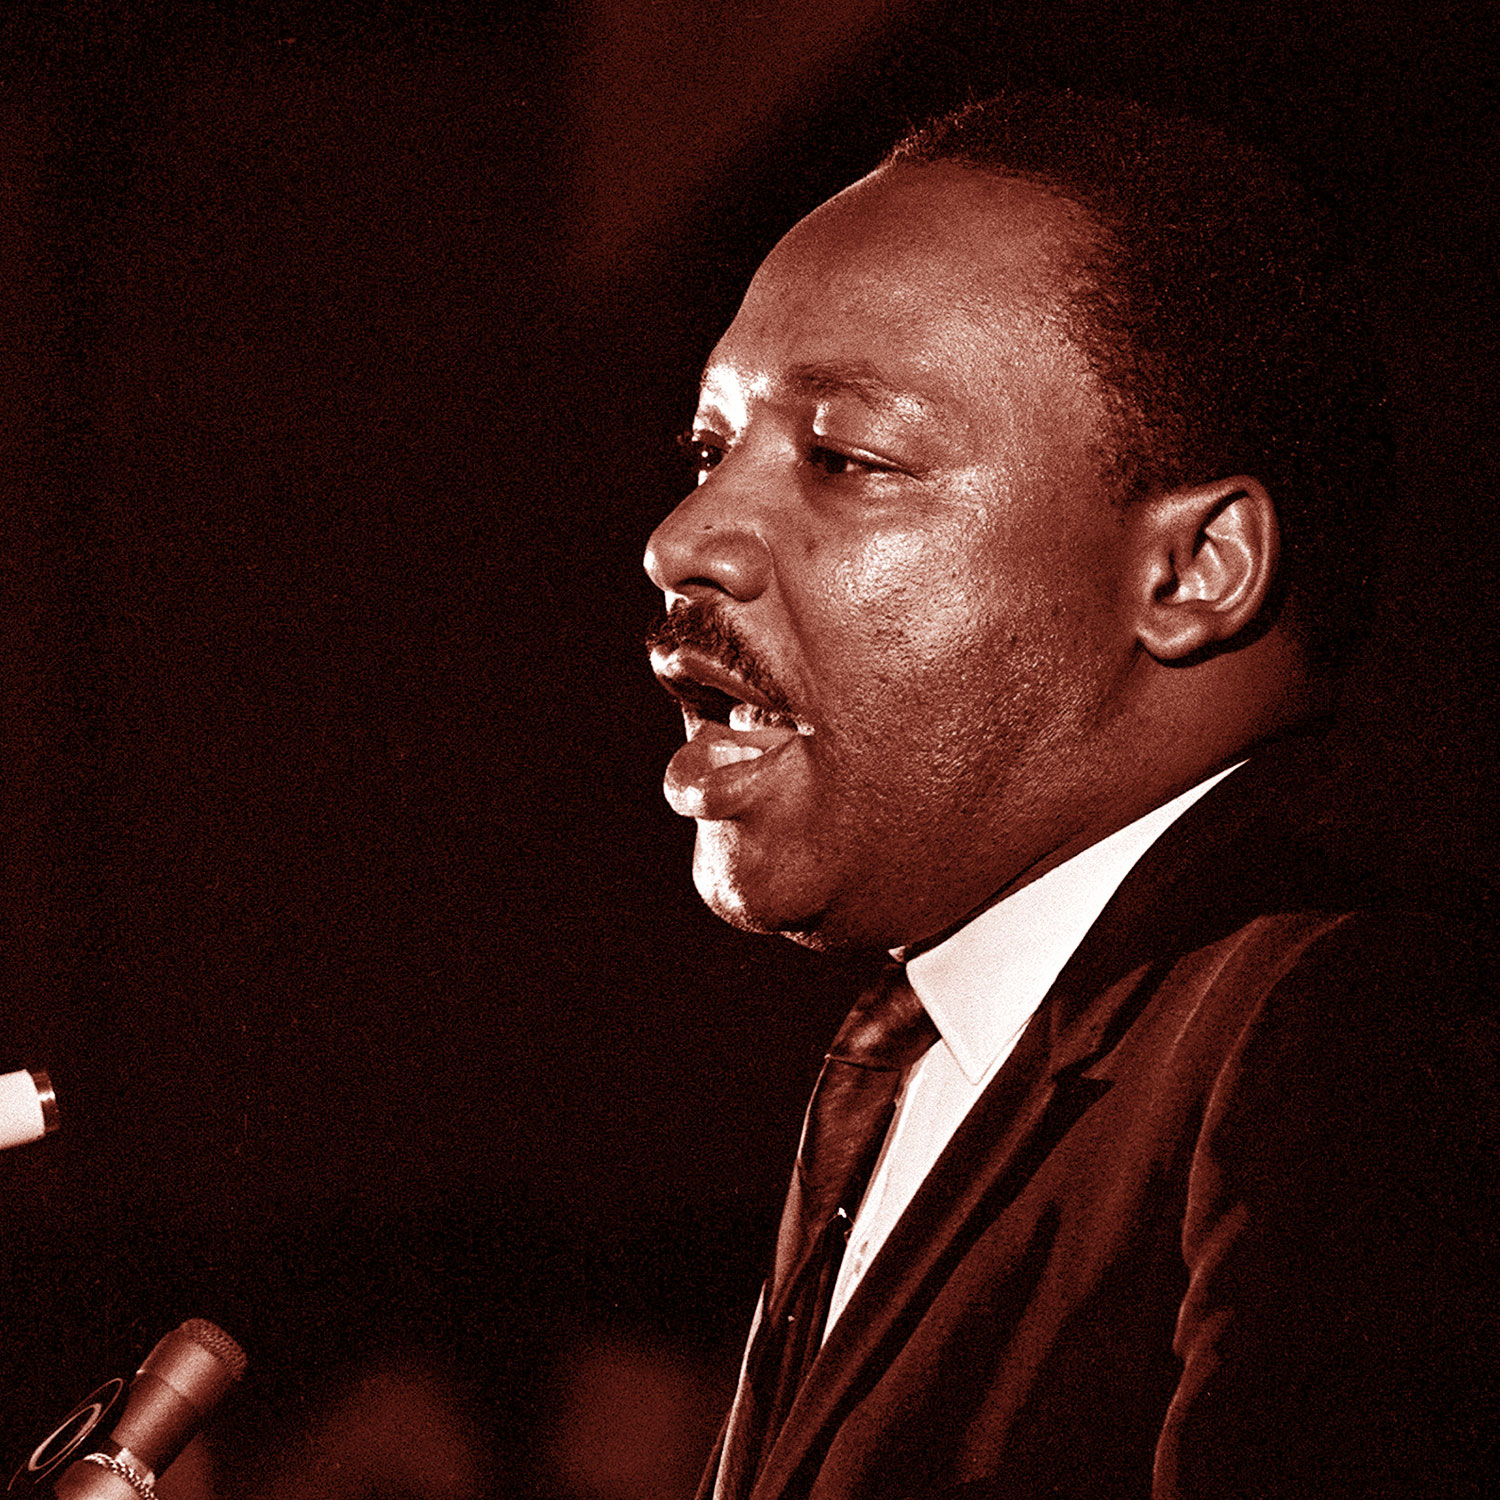 The day Martin Luther King Jr. died